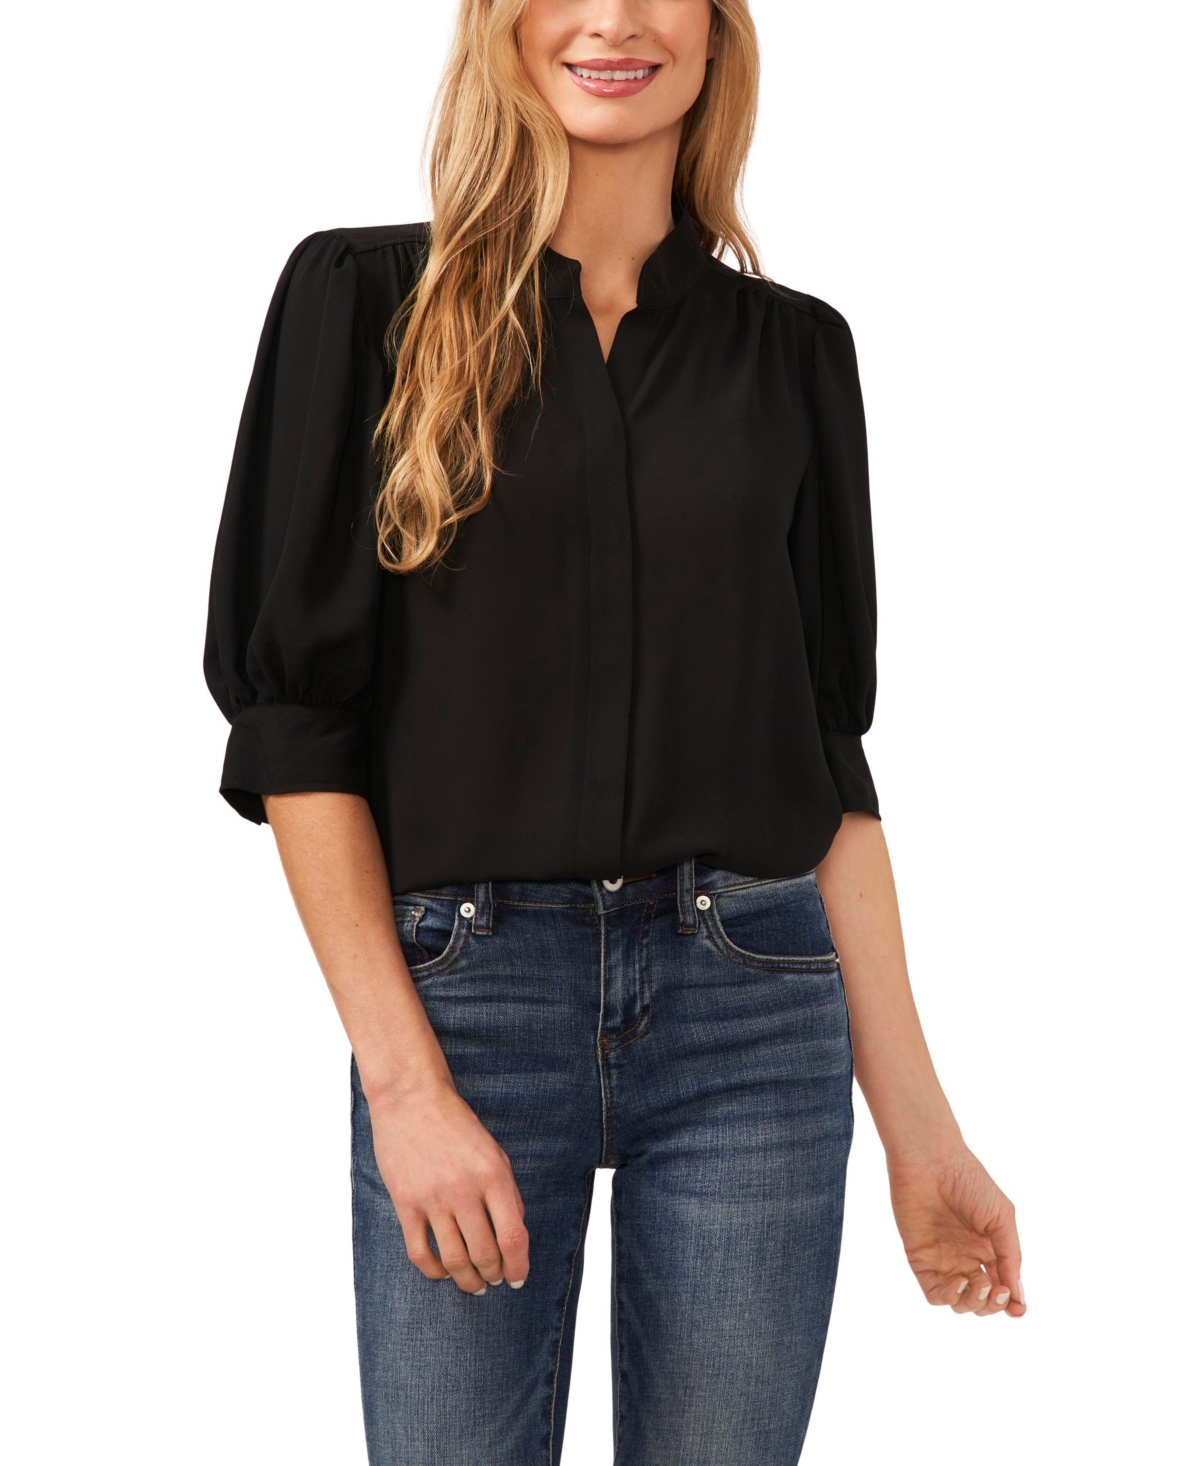 Women's Elbow Sleeve Collared Button Down Blouse - Rich Black